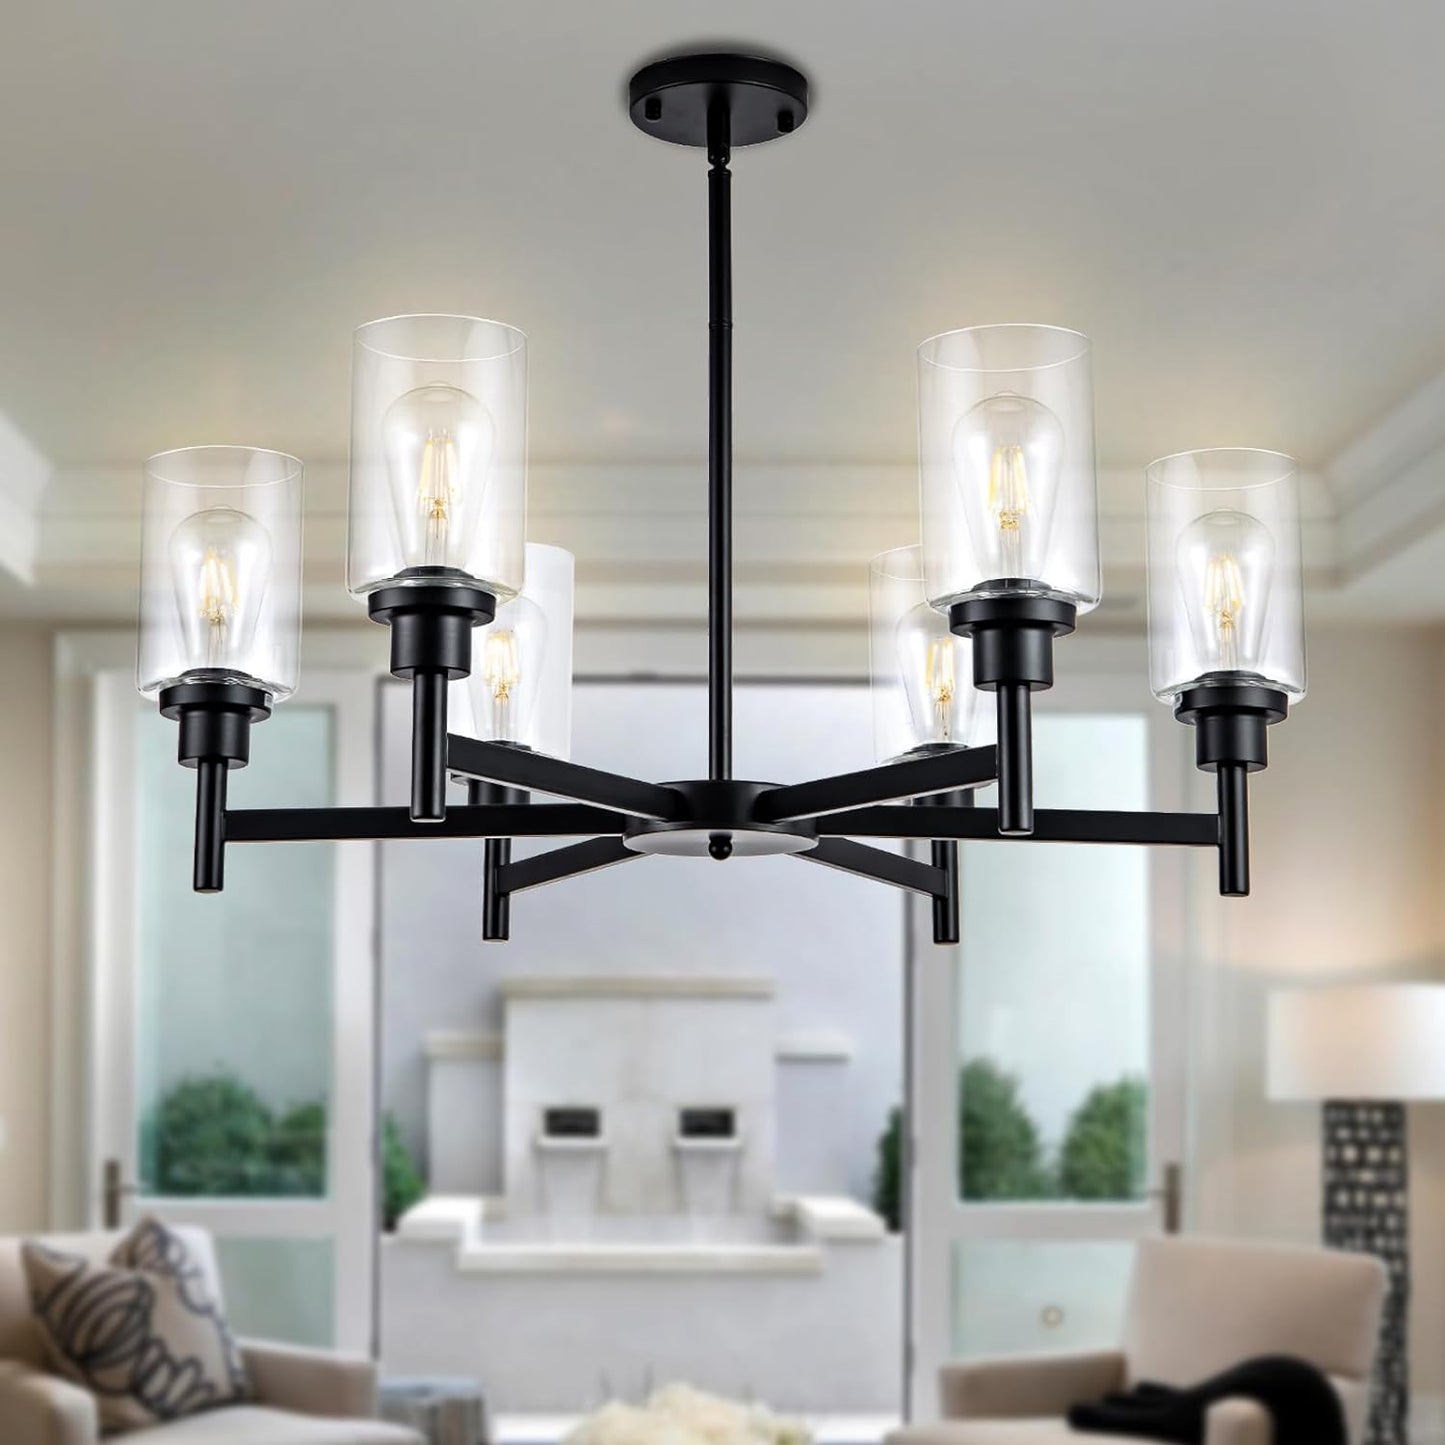 HCCZ 6 Light Farmhouse Chandelier Black Dining Room Light Fixture Over Table Industrial Hanging Pendant Lighting for Living Room Foyer Kitchen Island Adjustable Height E26 Socket with Glass Shad